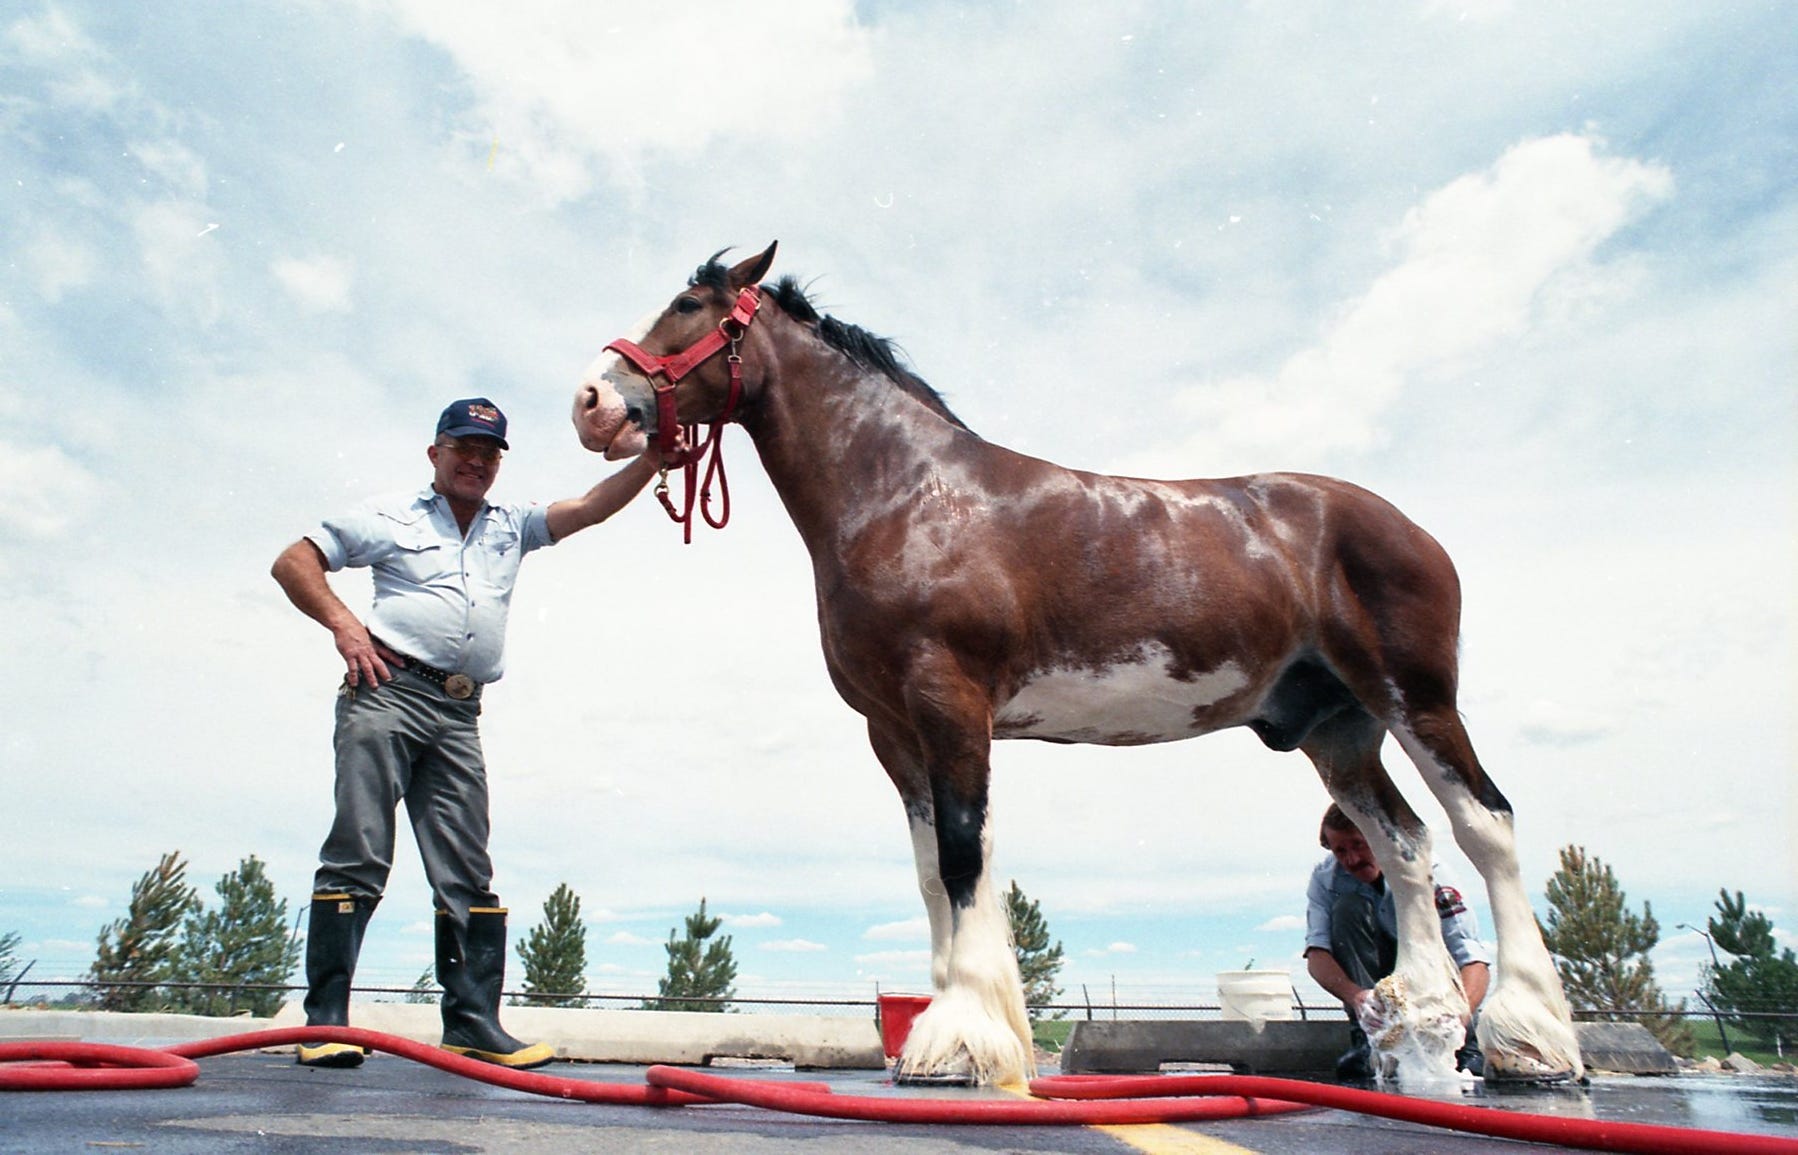 Get your picture with a Budweiser Clydesdale this summer